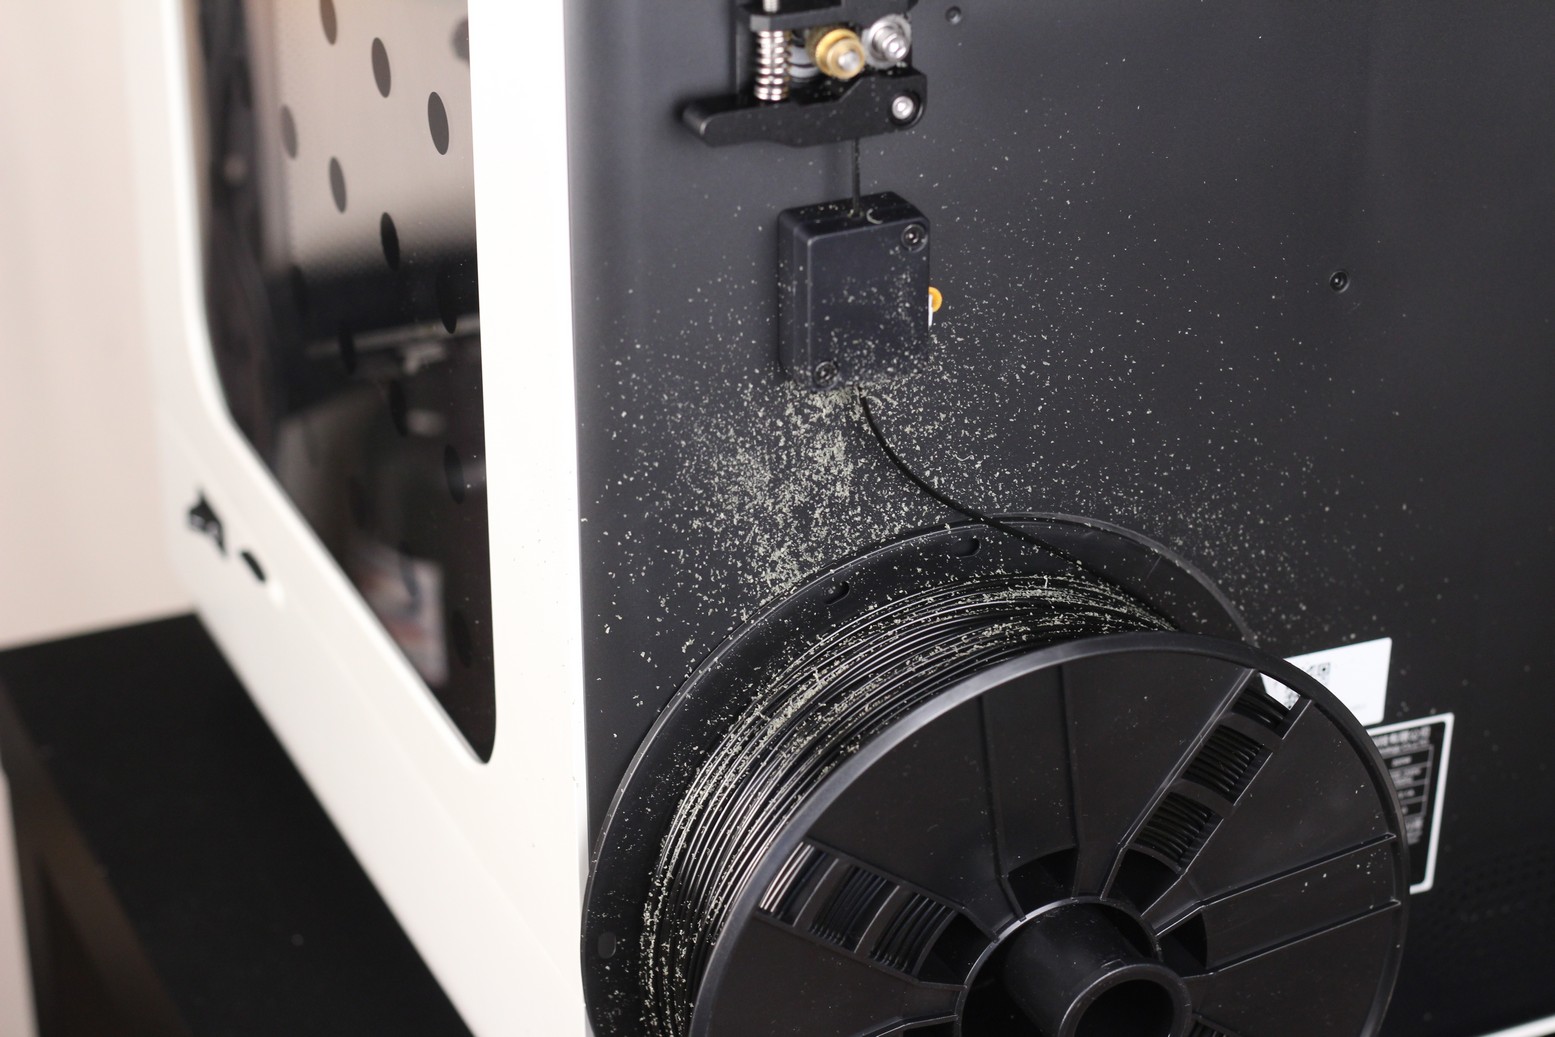 Filament grinding on Creality CR 200B | Creality CR-200B Review: Budget Enclosed 3D Printer